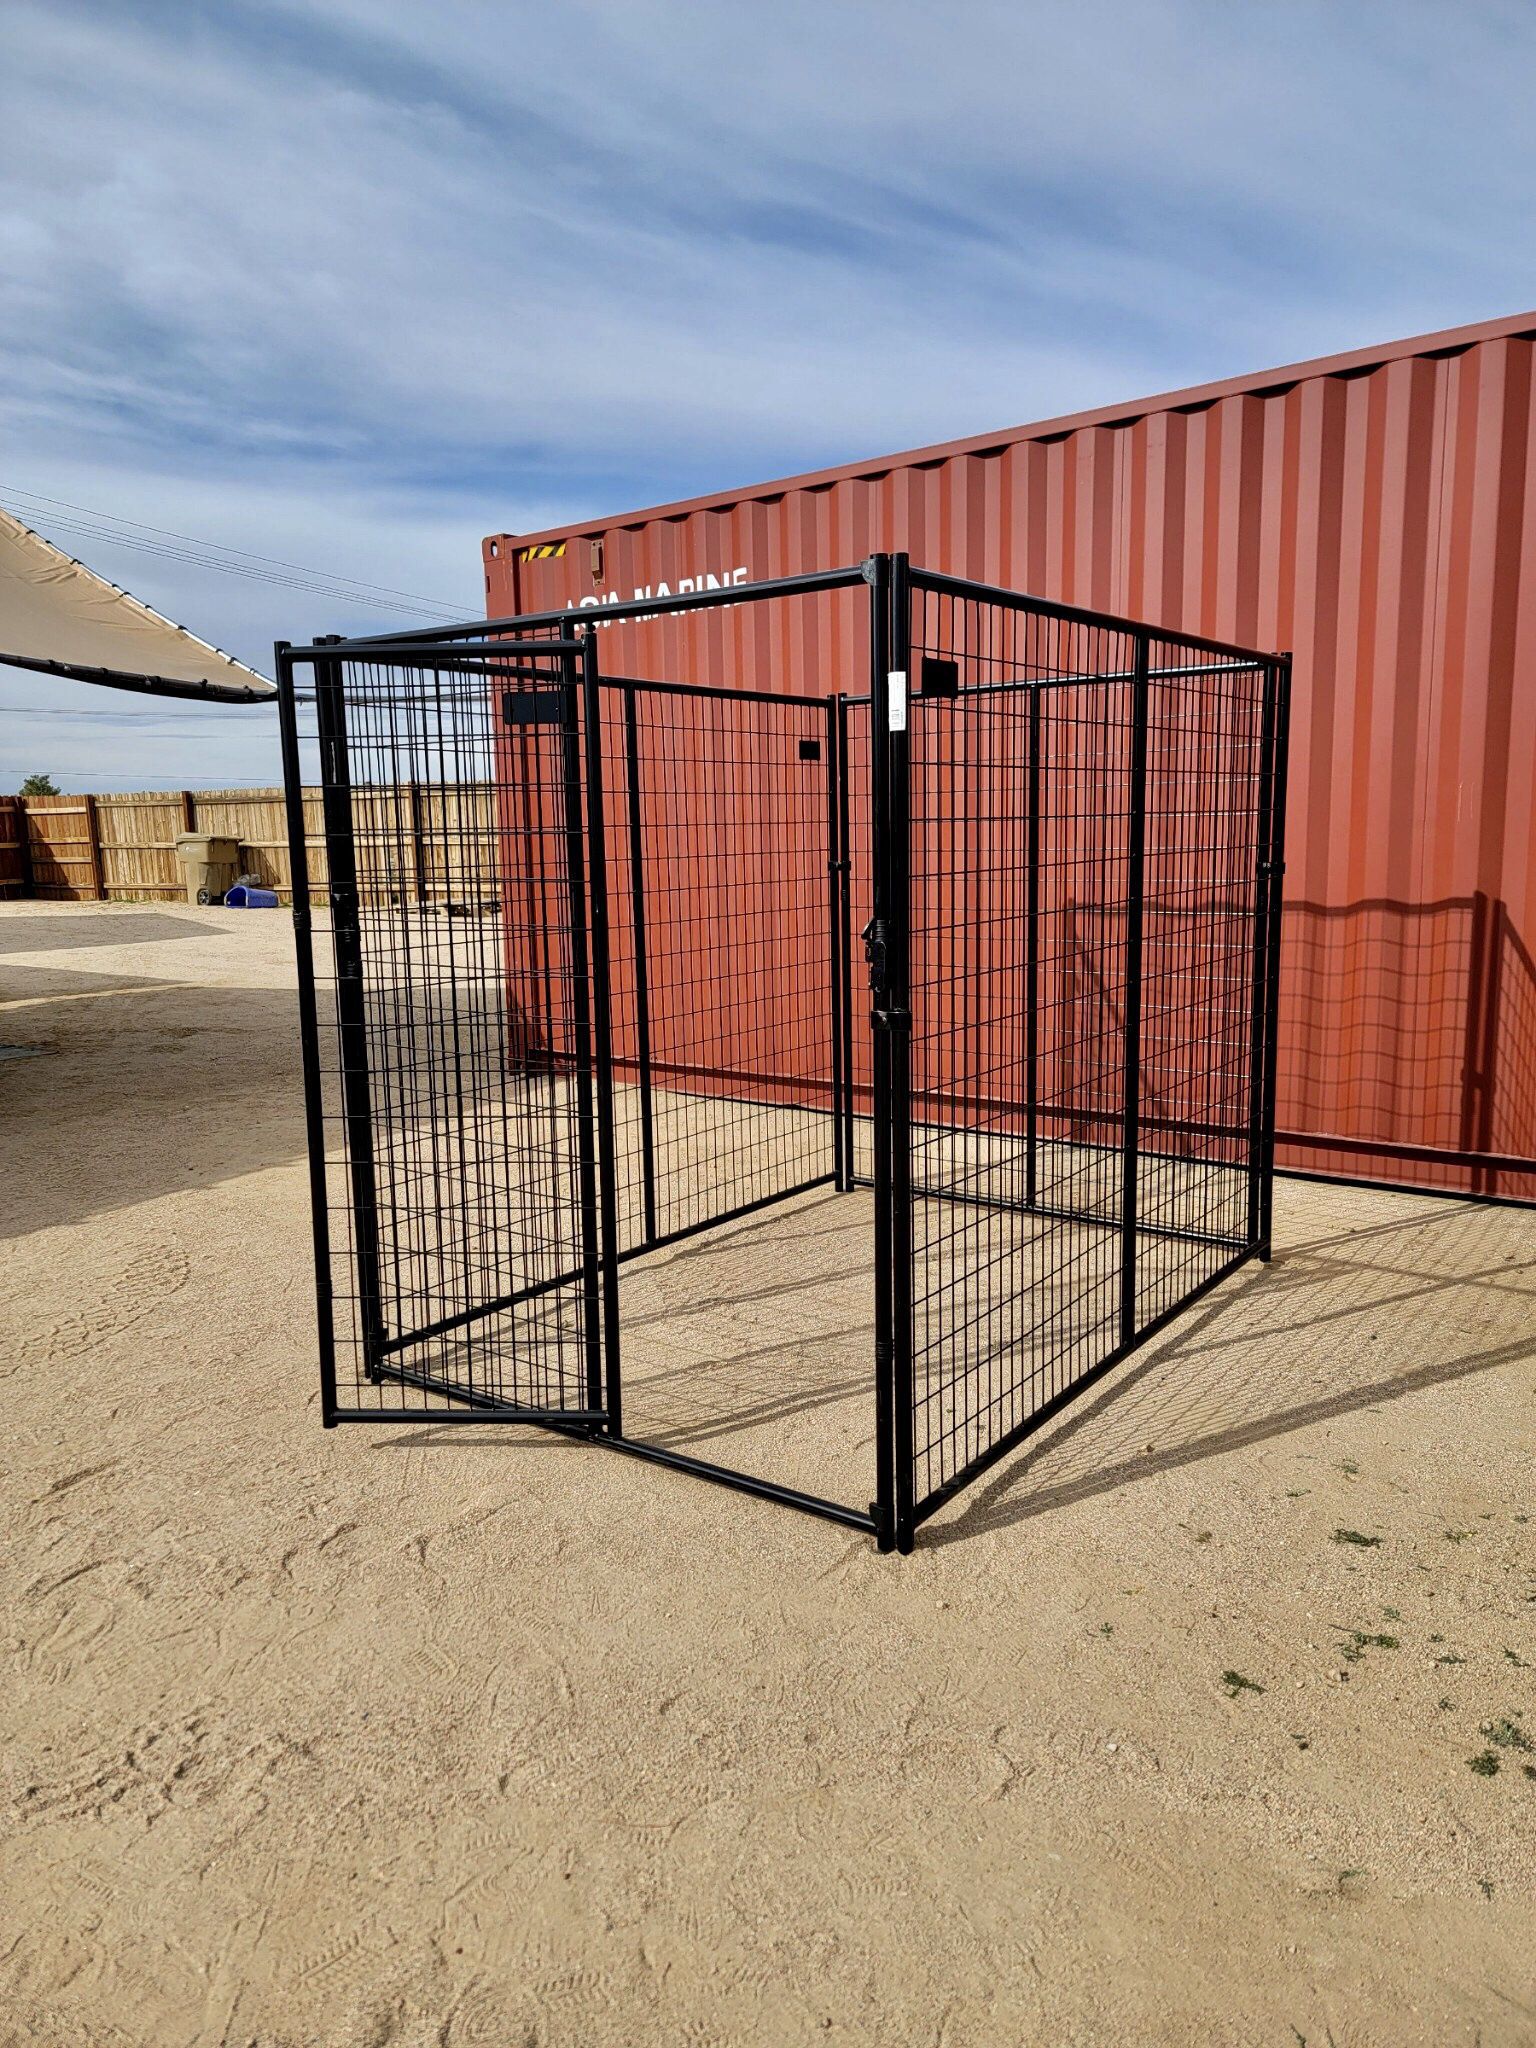 Large Outdoor Heavy Duty Dog Kennel Dog Run With 8 Gauge Mesh 7x5x6 (new) 